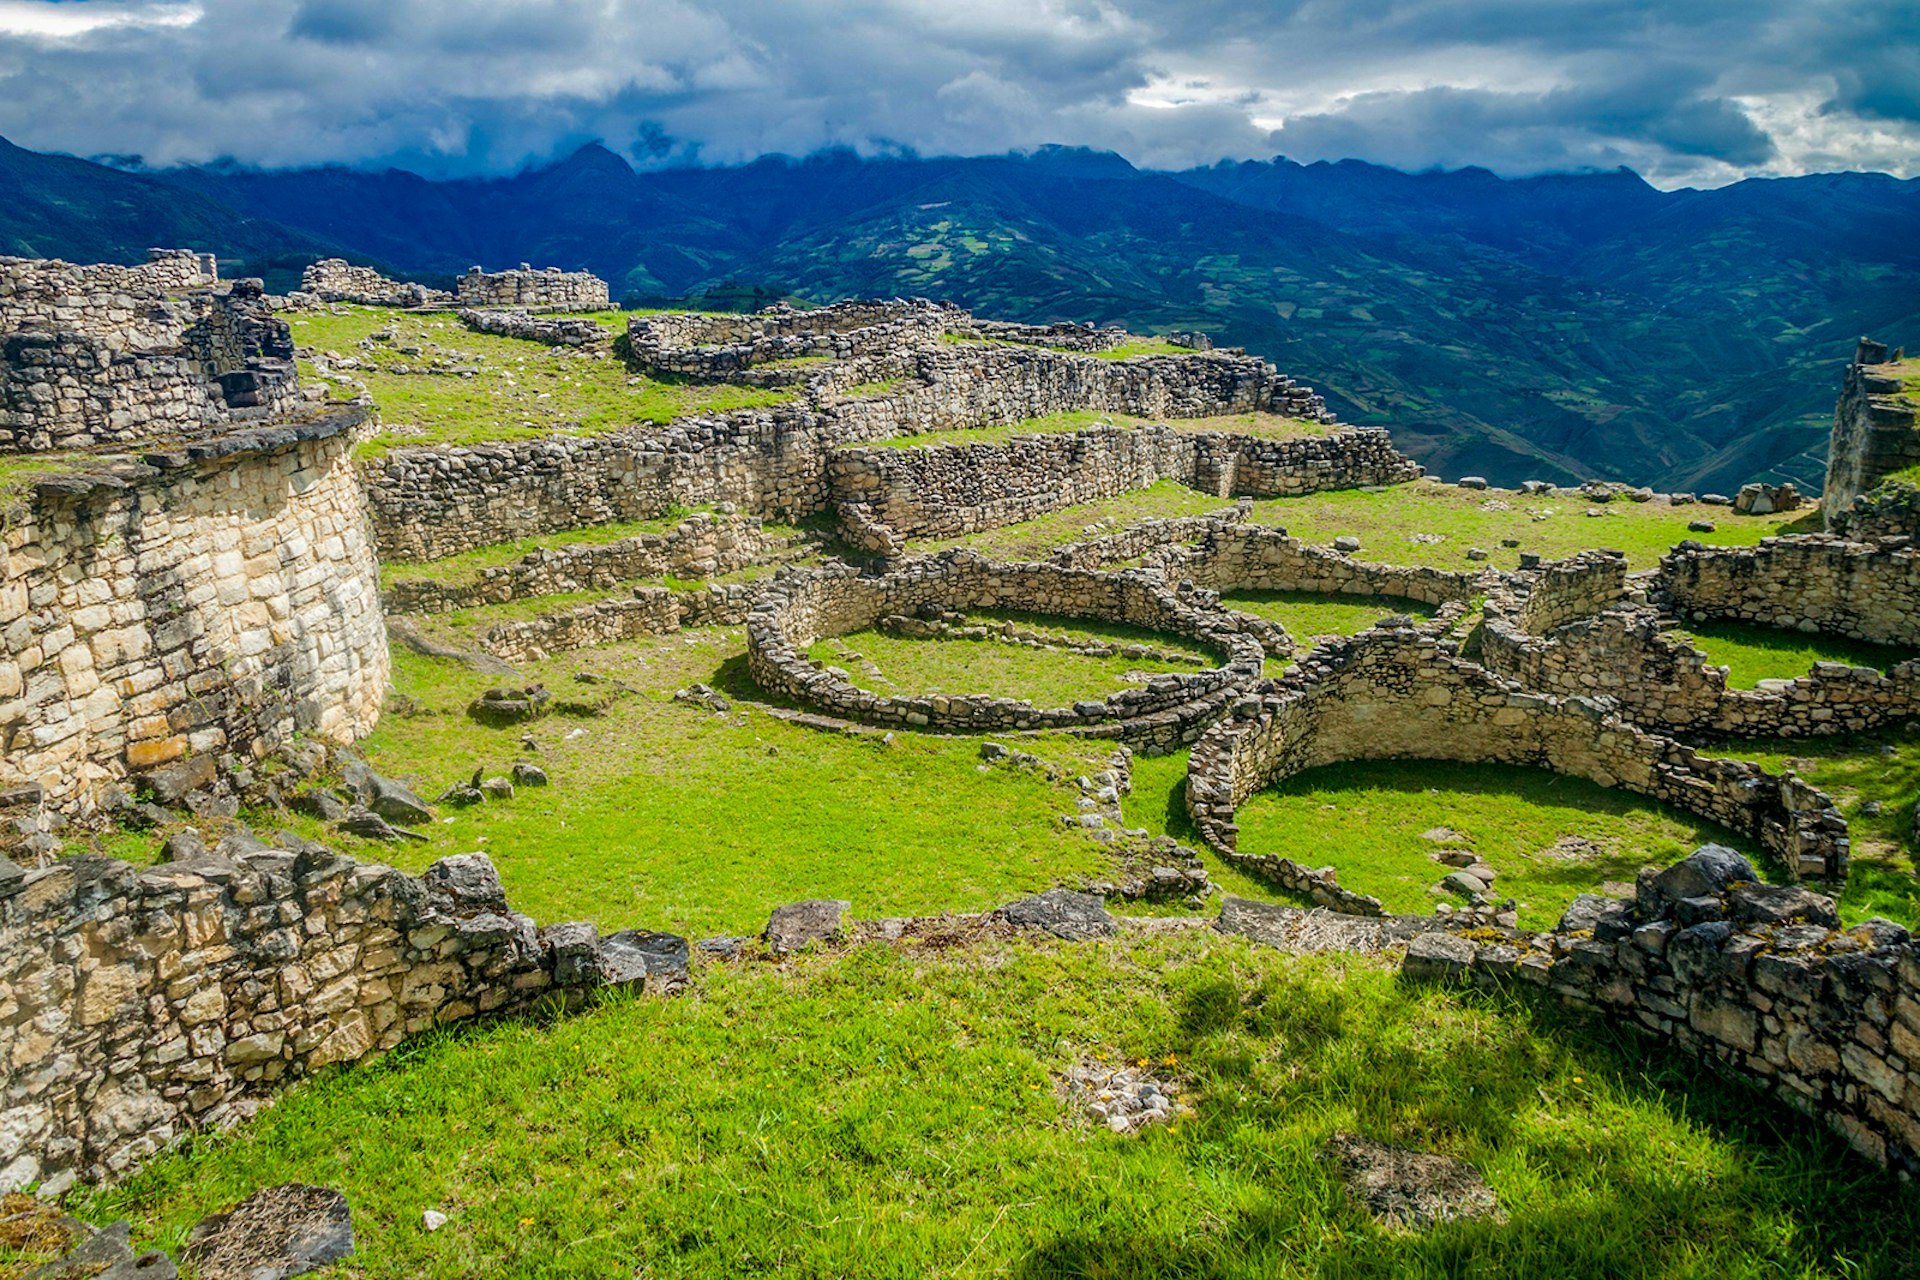 Peru travel - A view of the Kuelap citadel site, with a grassy field punctuated by foundations of stone walls and round homes